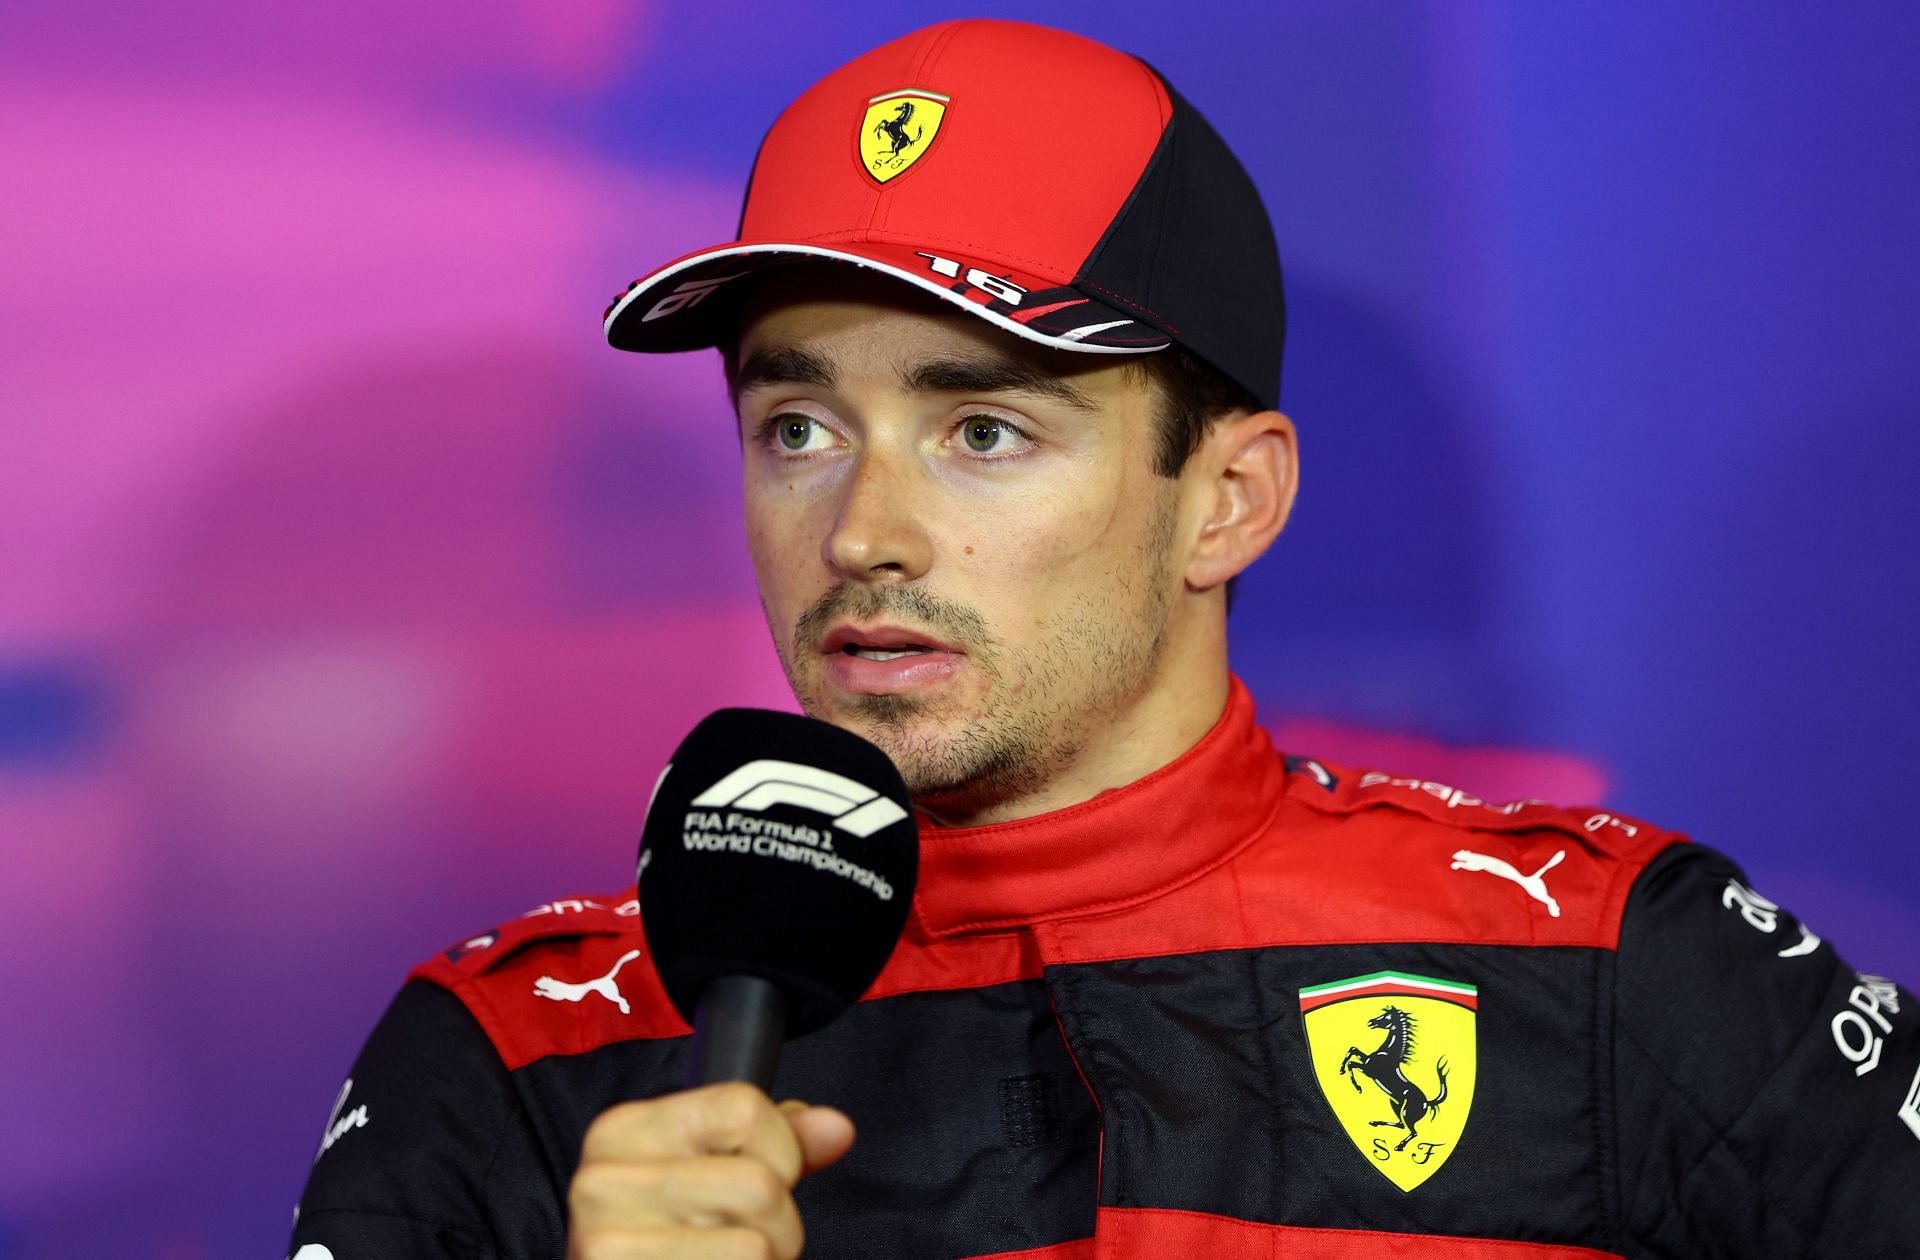 Charles Leclerc will be desperate for a straightforward weekend in Austria